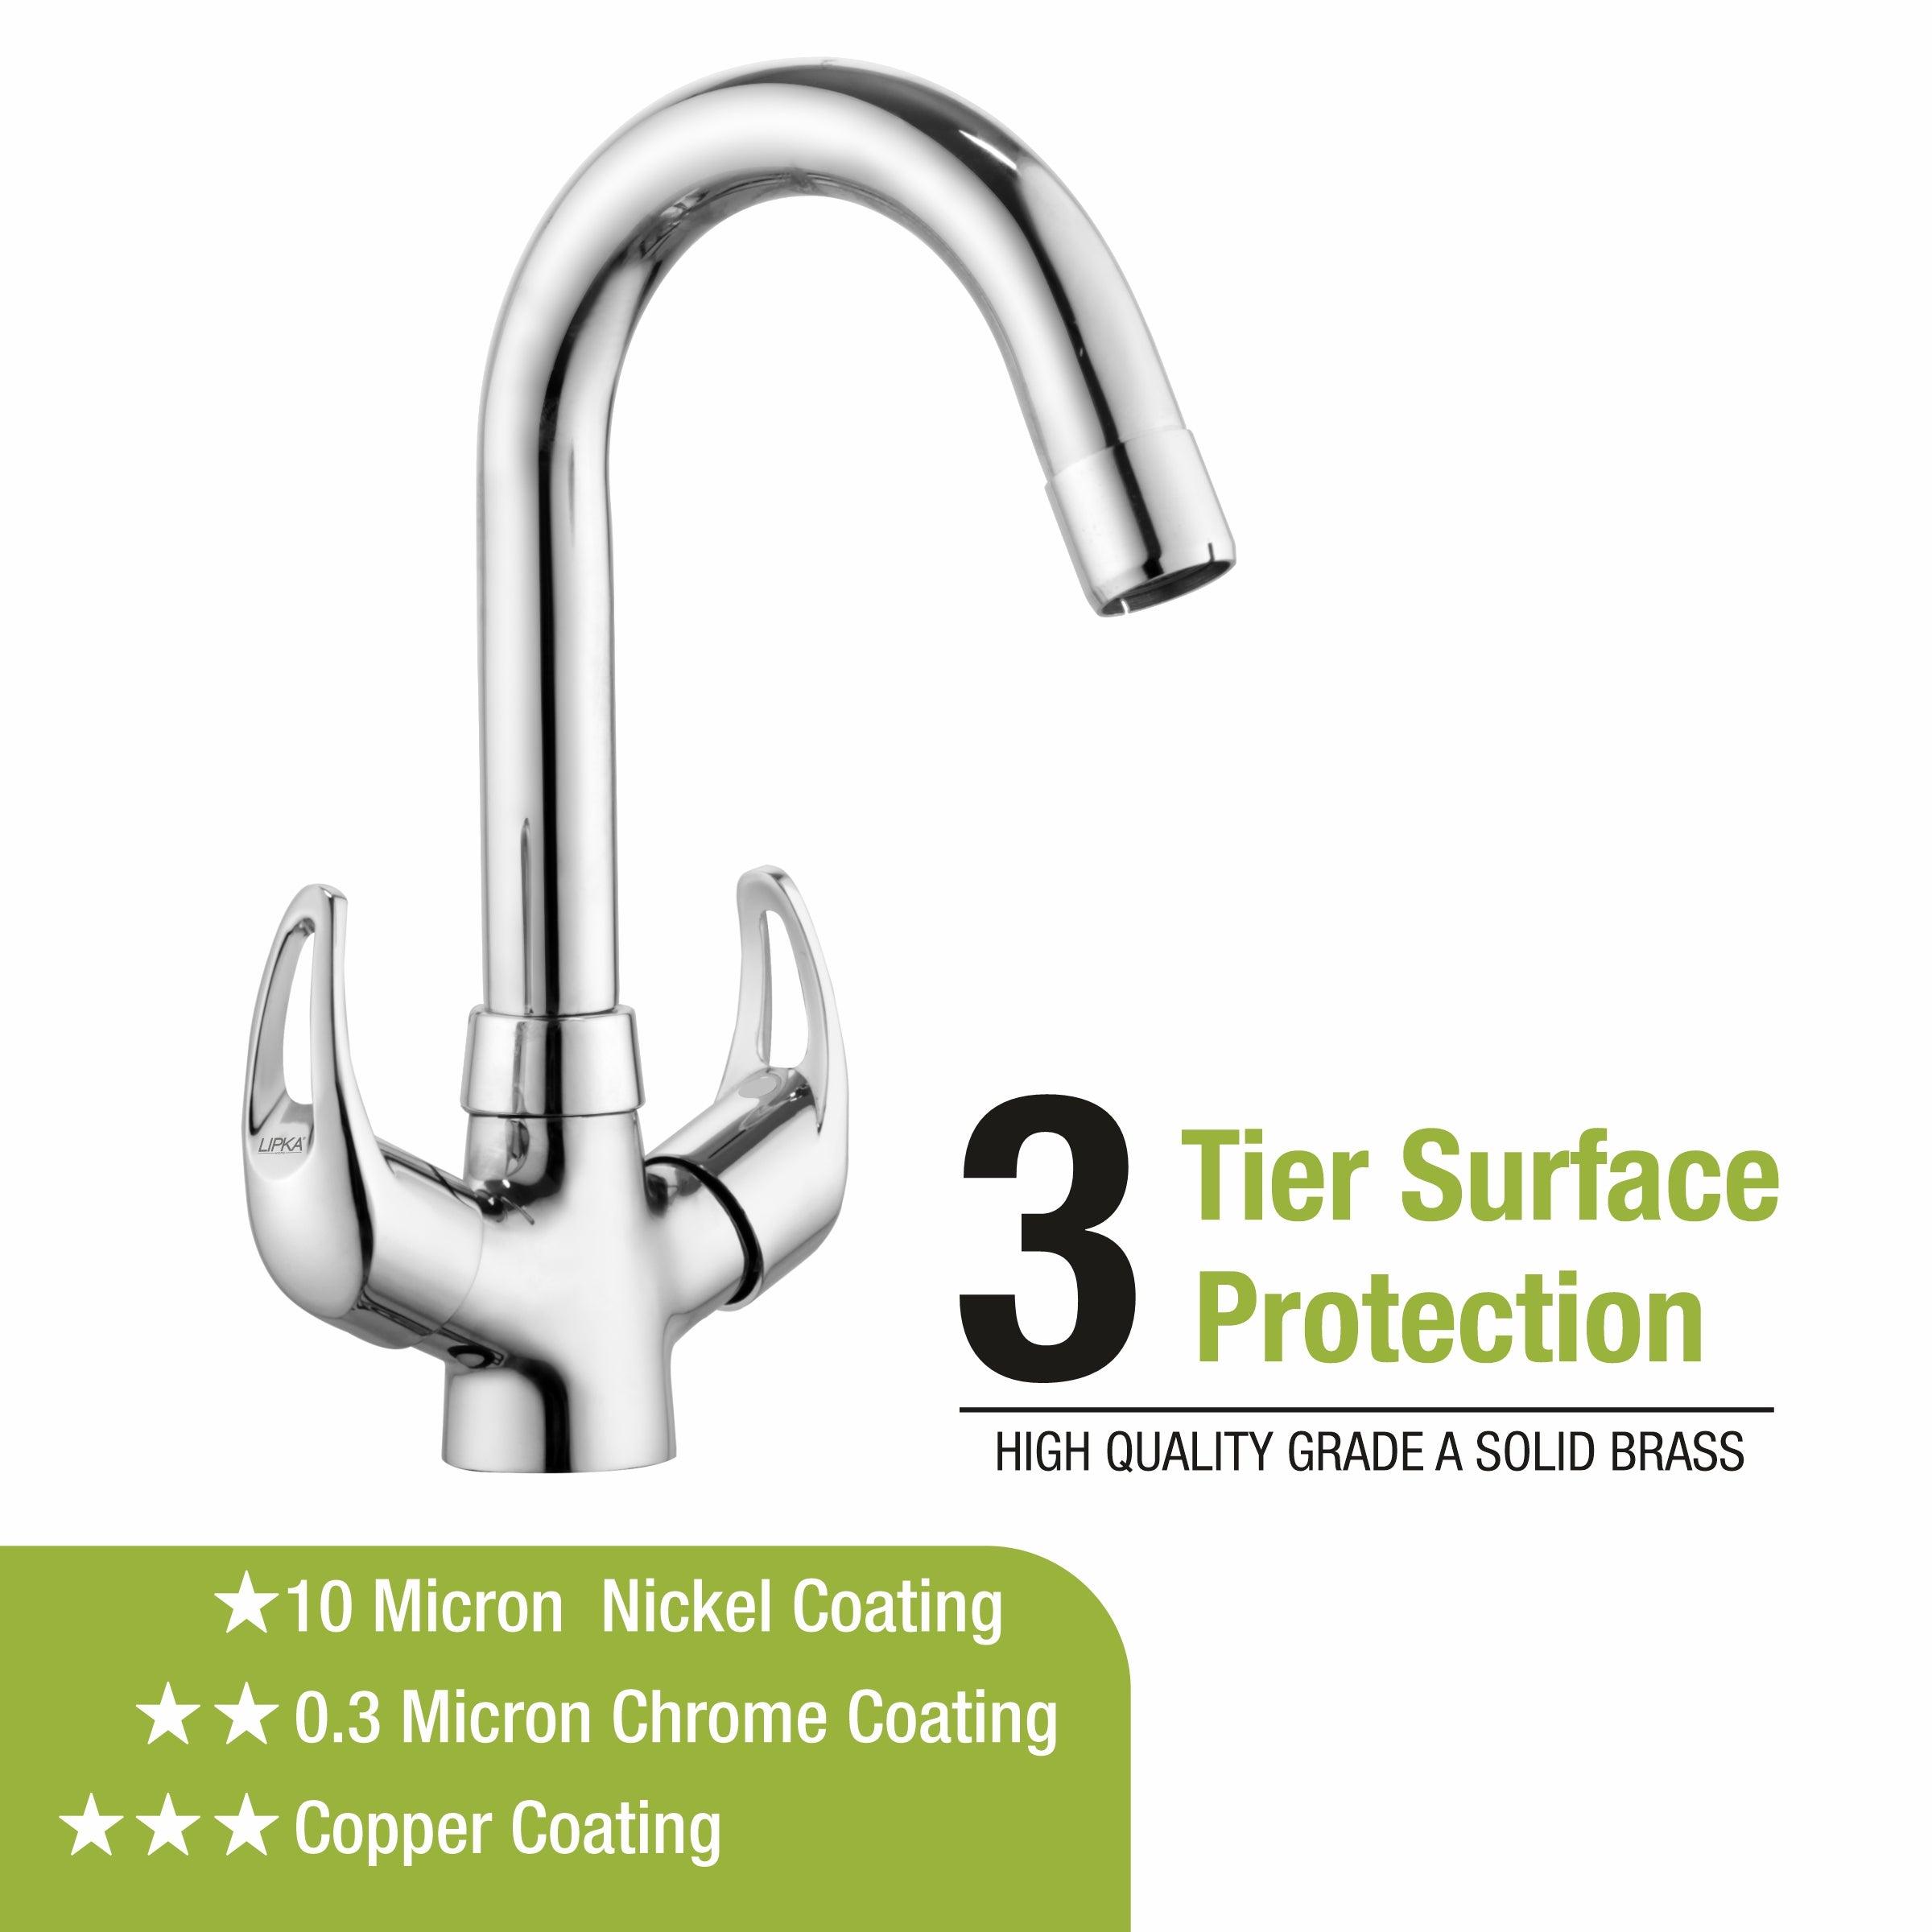 Pixel Centre Hole Basin Mixer Brass Faucet with Round Swivel Spout (12 Inches) - LIPKA - Lipka Home